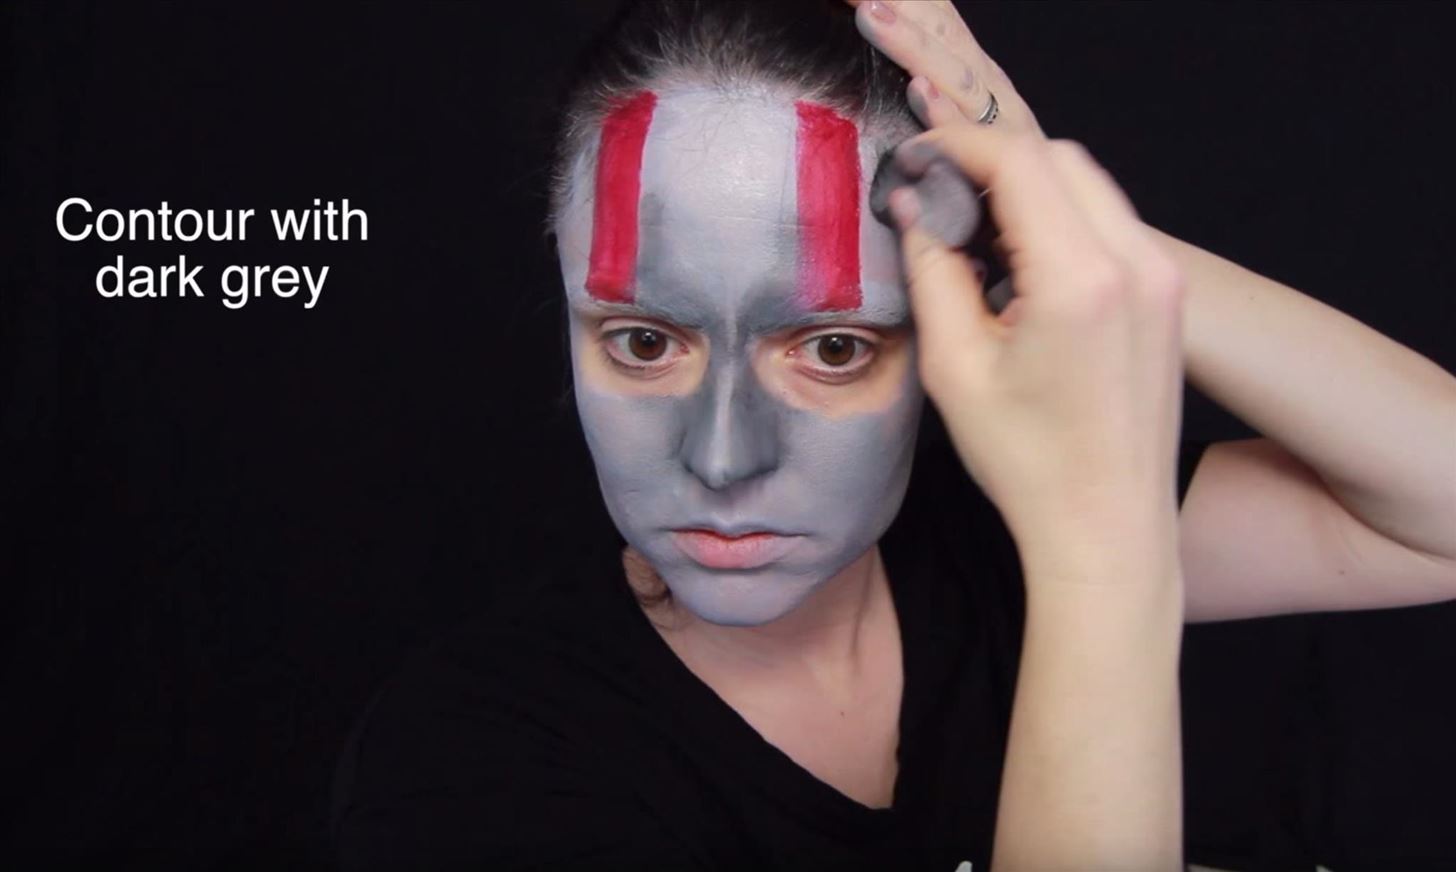 Make Your Own Ant-Man Costume with Nothing More Than Makeup